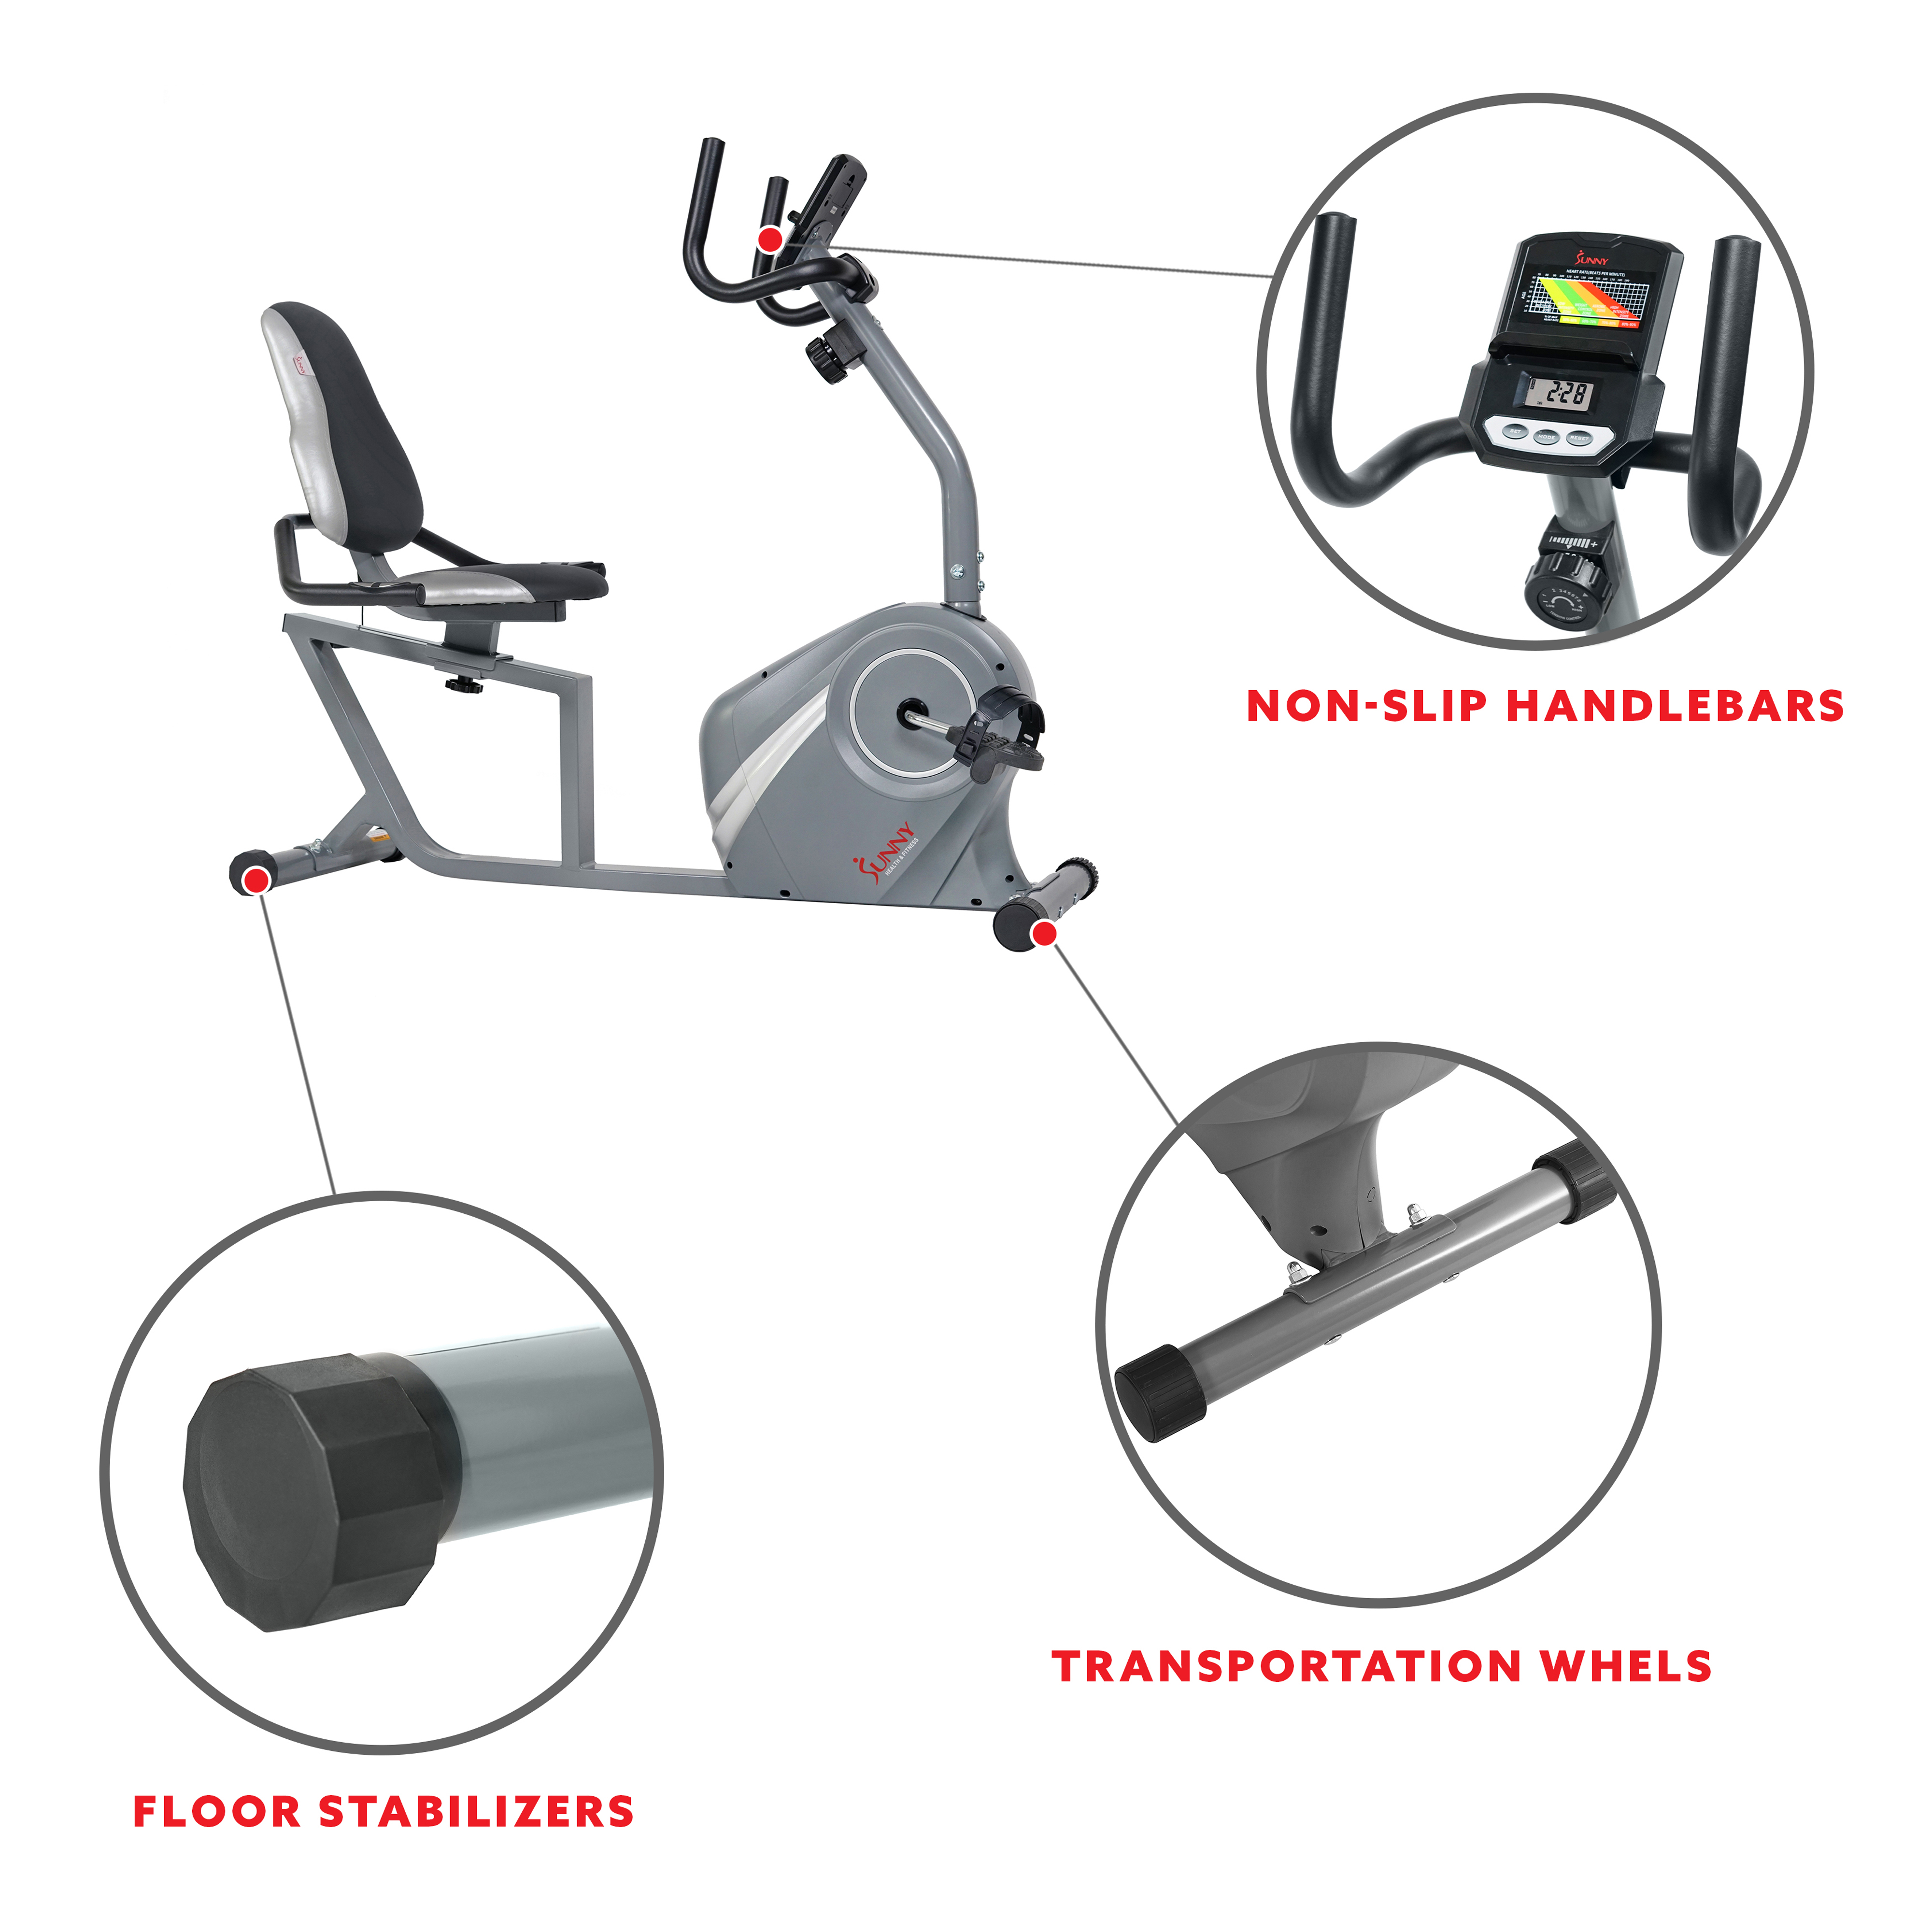 Sunny Health & Fitness Magnetic Recumbent Exercise Bike for Indoor Cardio Training w/ Adjustable Soft Seat Cushion, SF-RB4876 - image 6 of 8